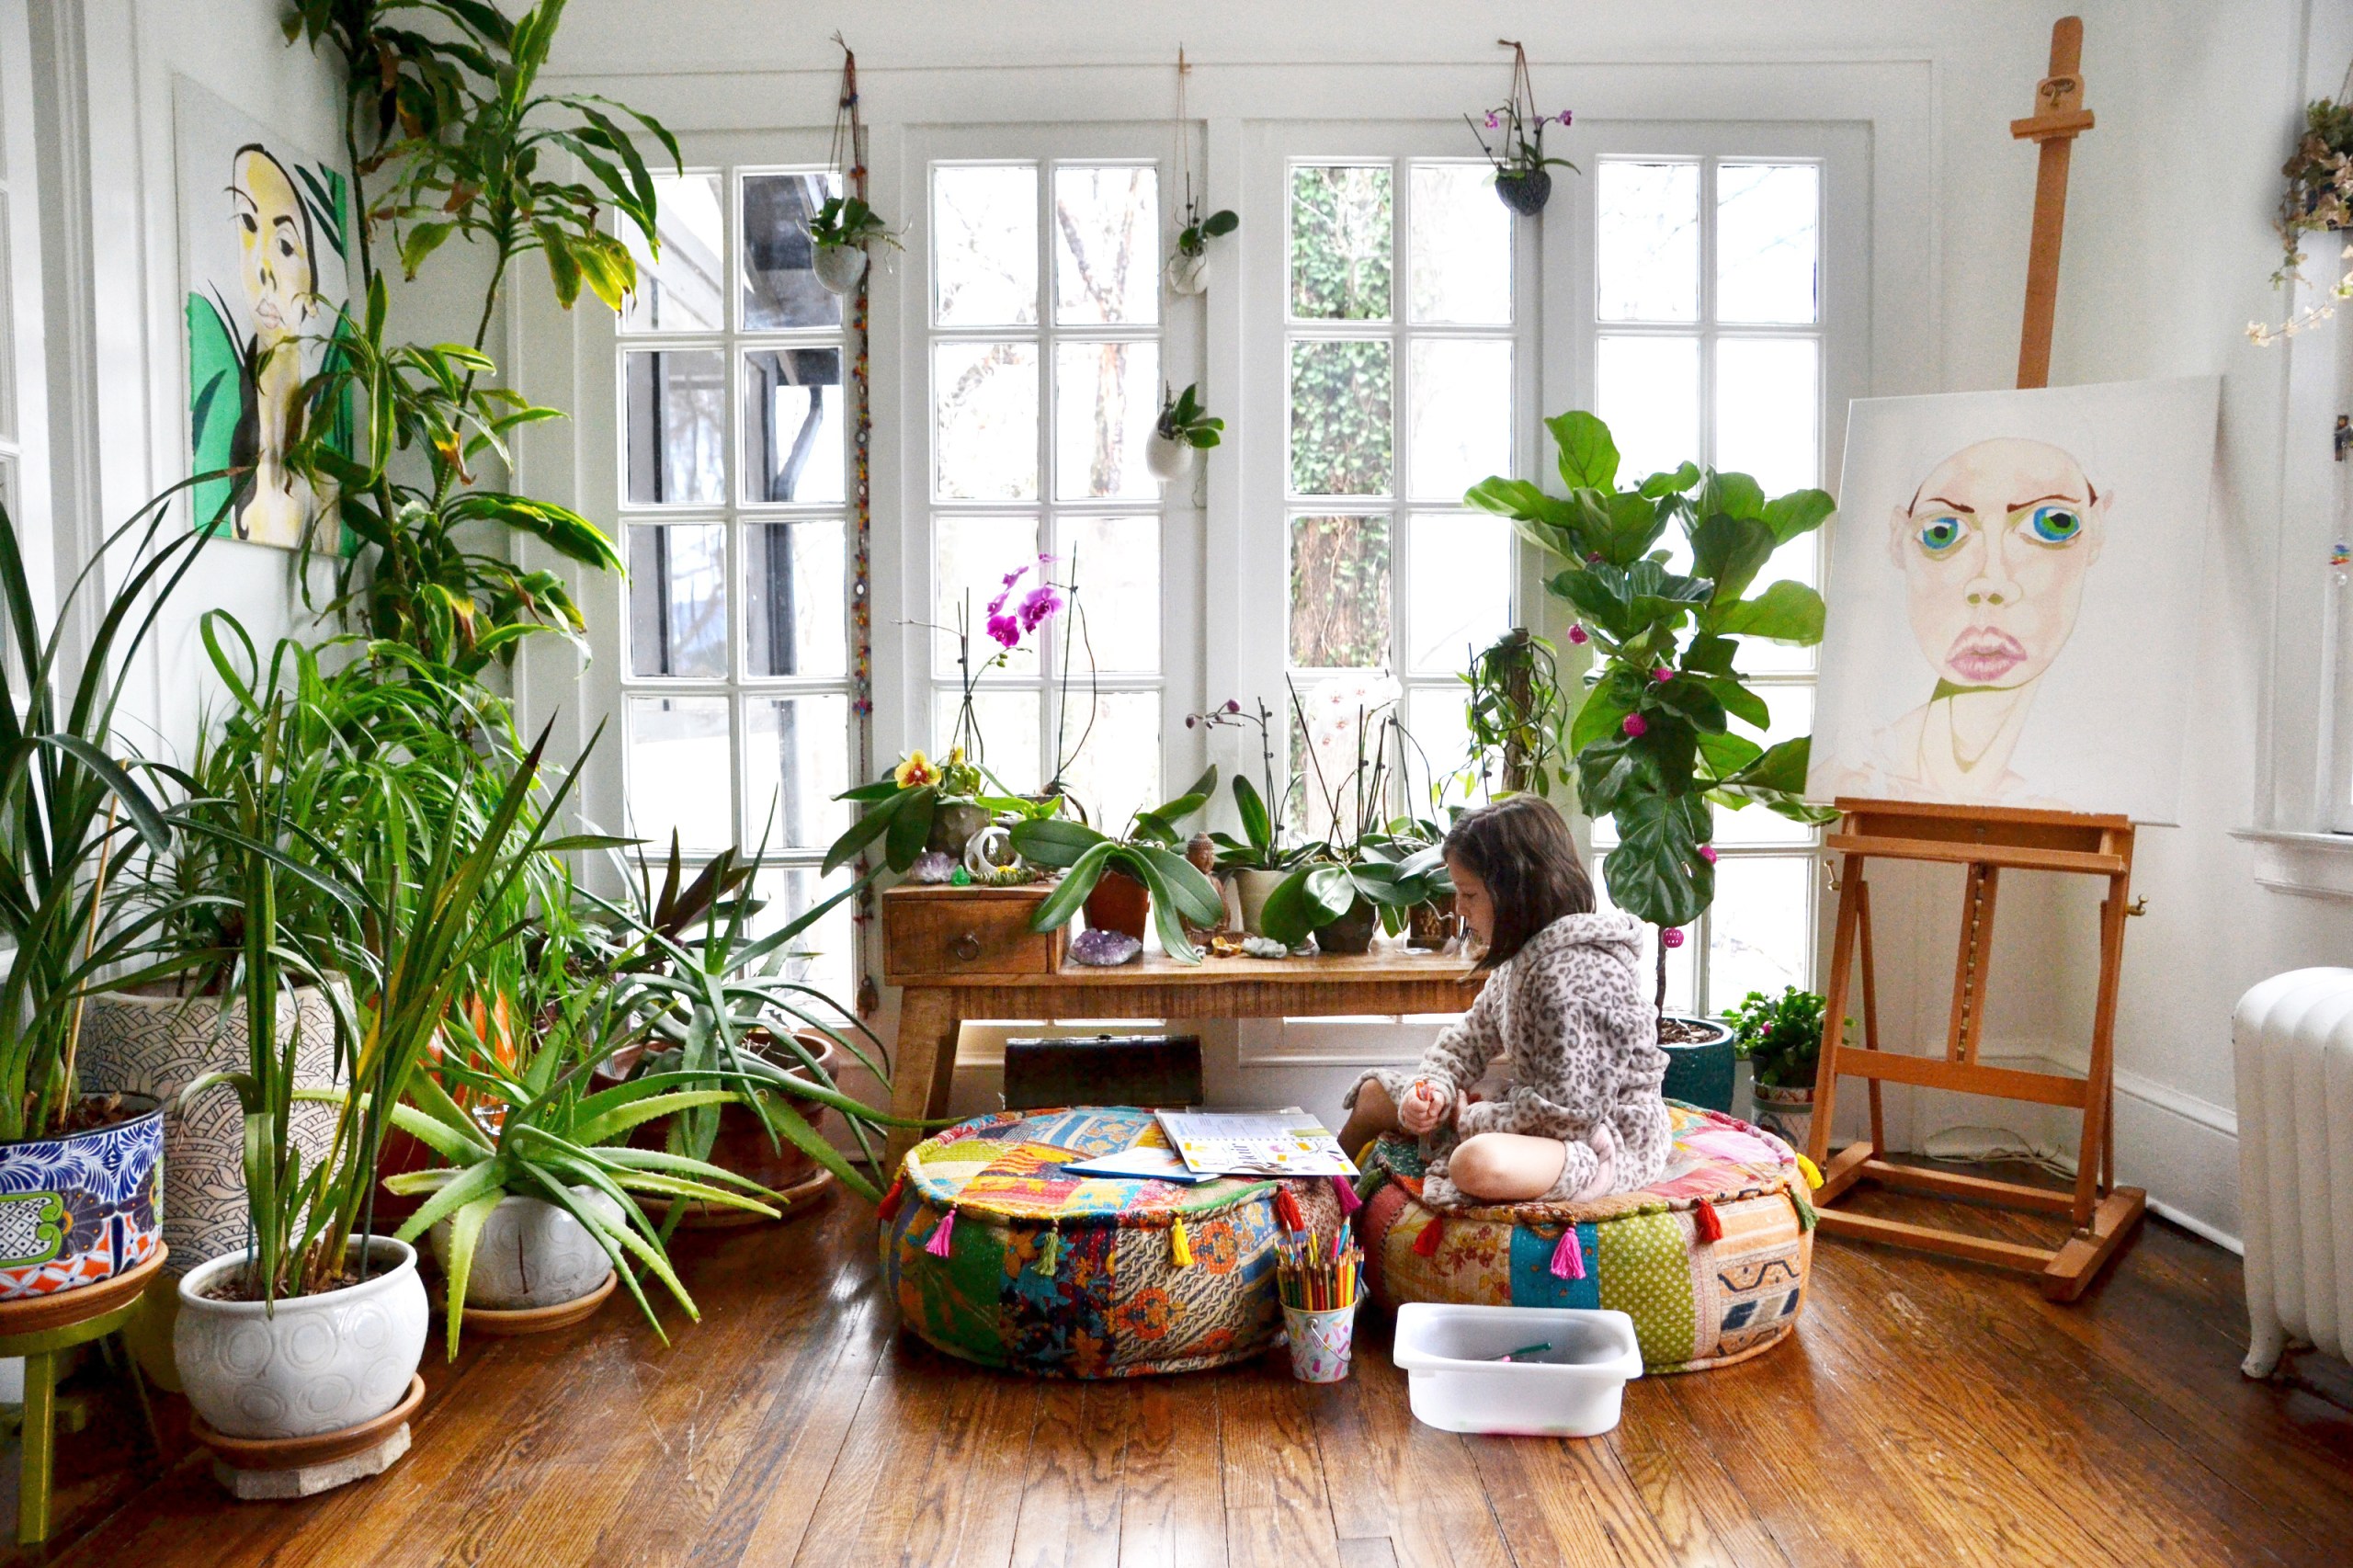 How To Care For House Plants Get Rid Of House Plant Bugs